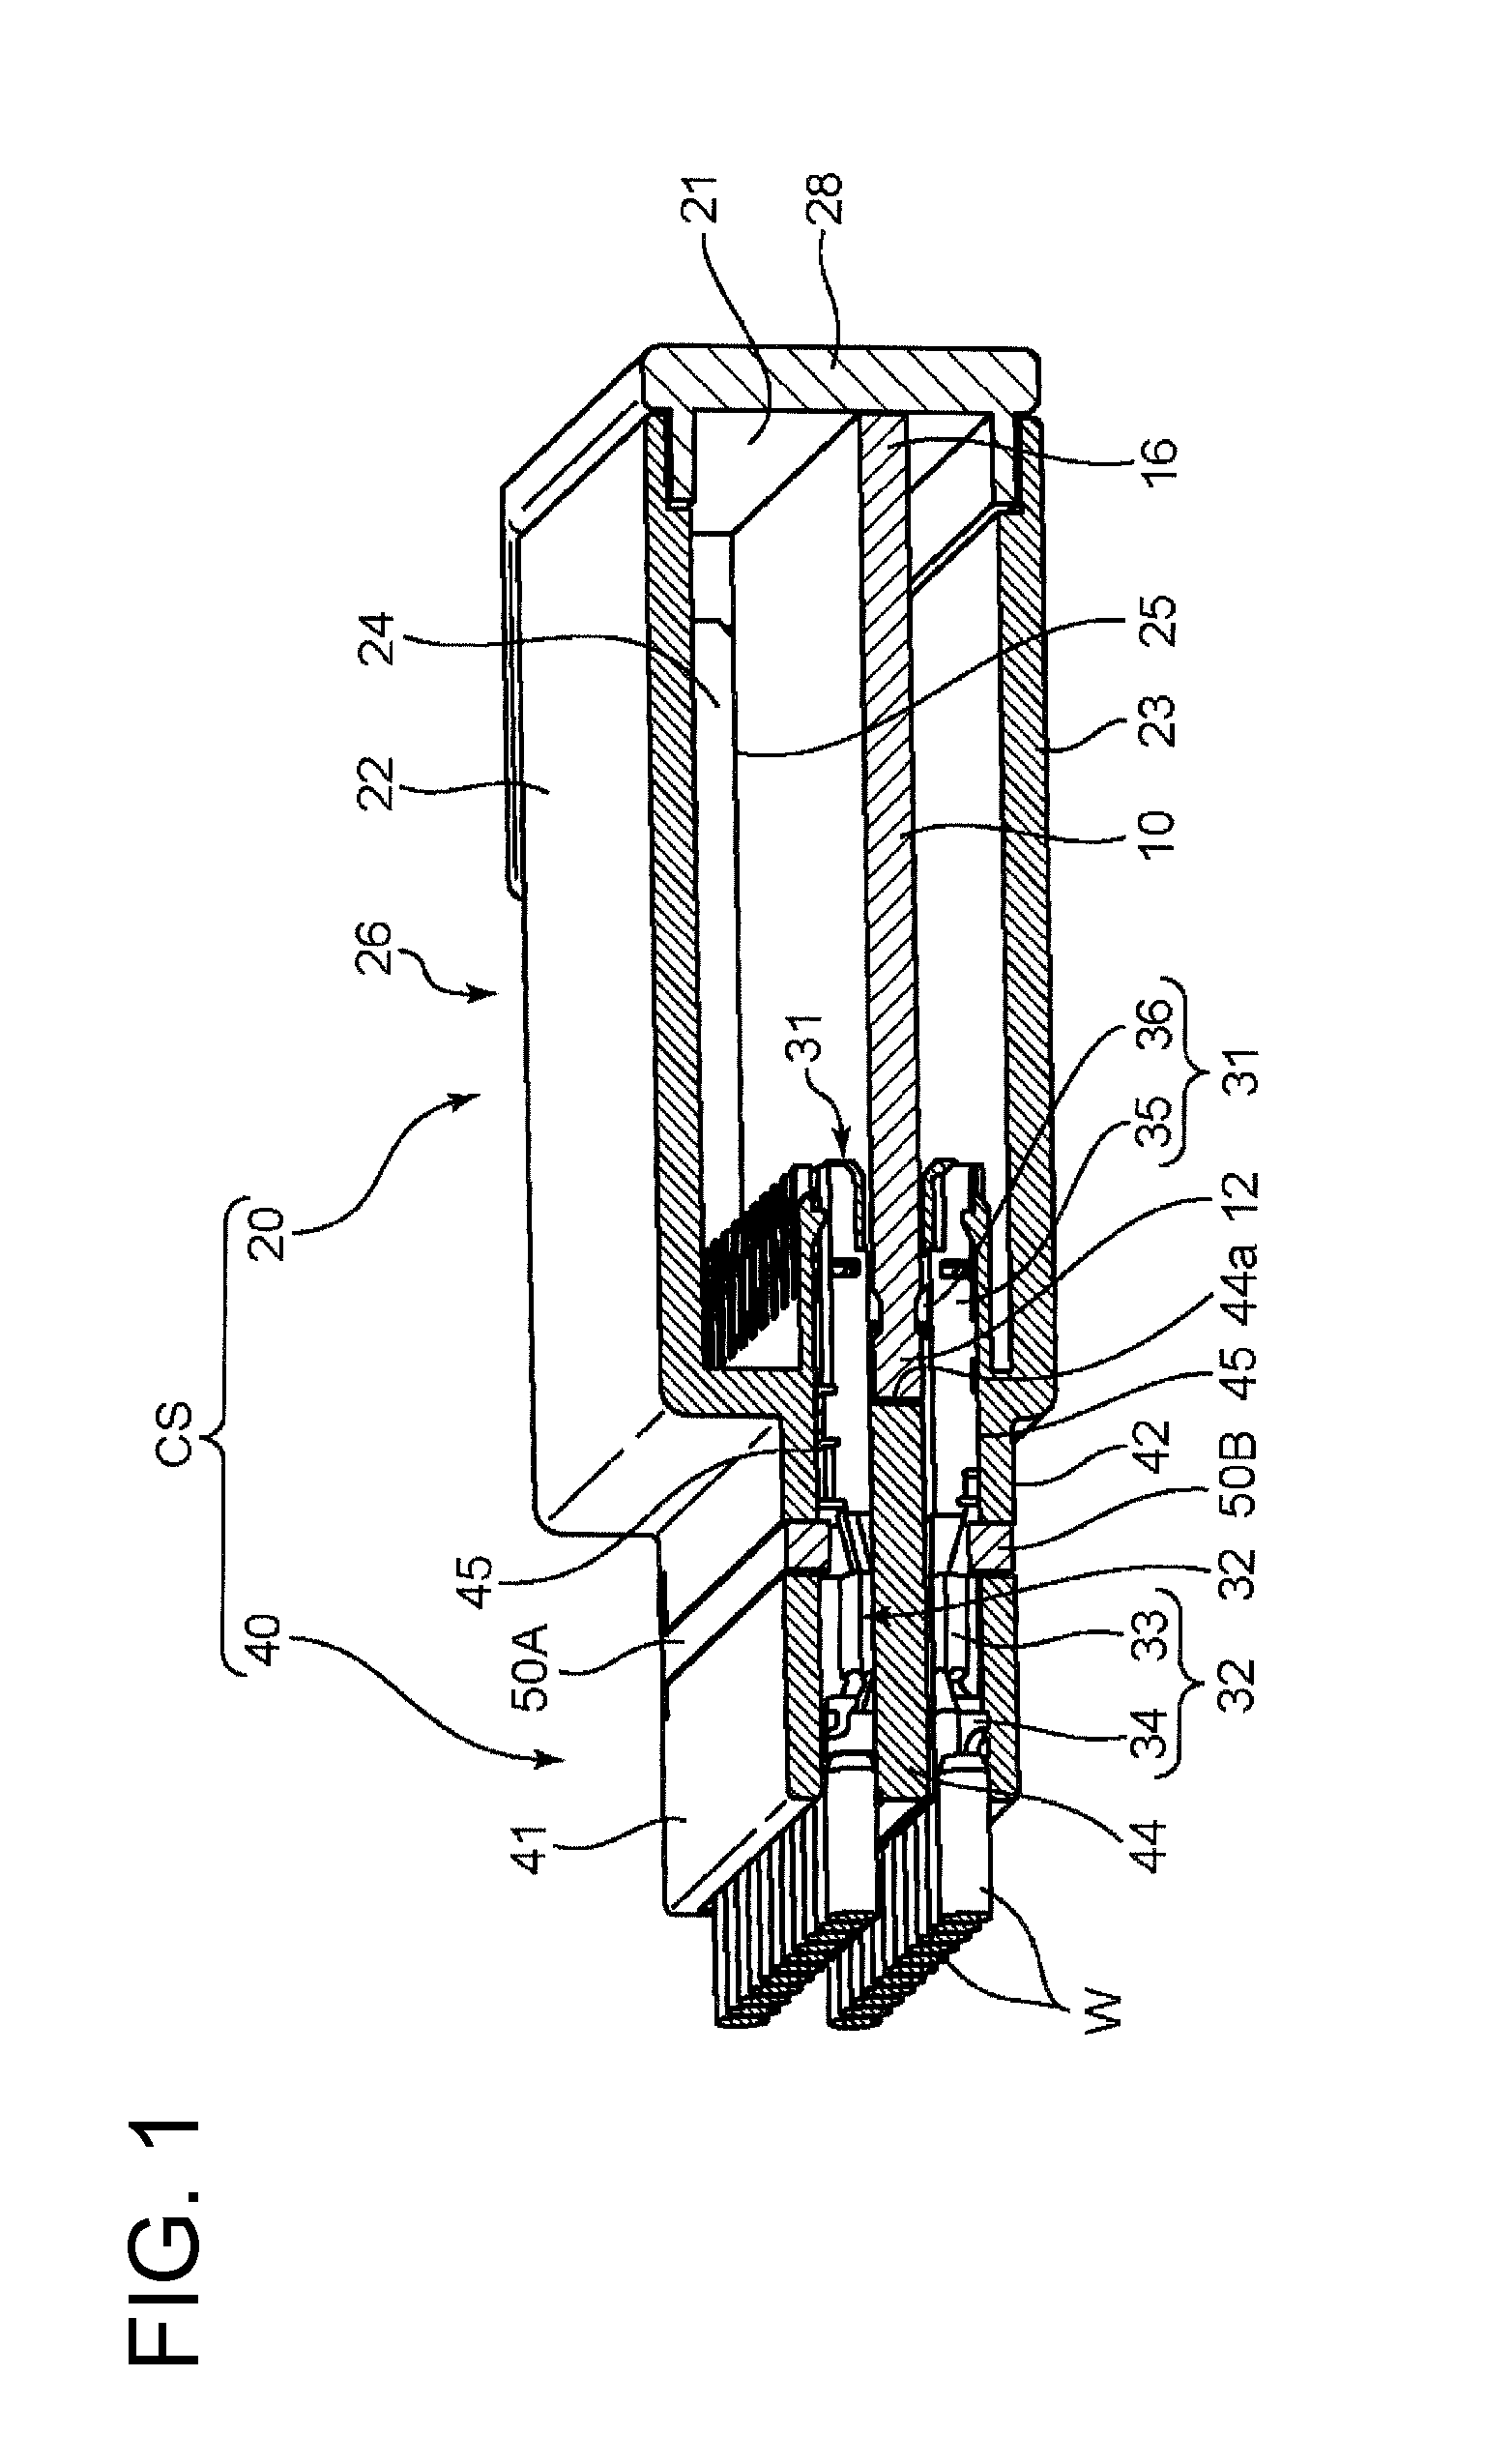 Electronic circuit unit capable of external connection